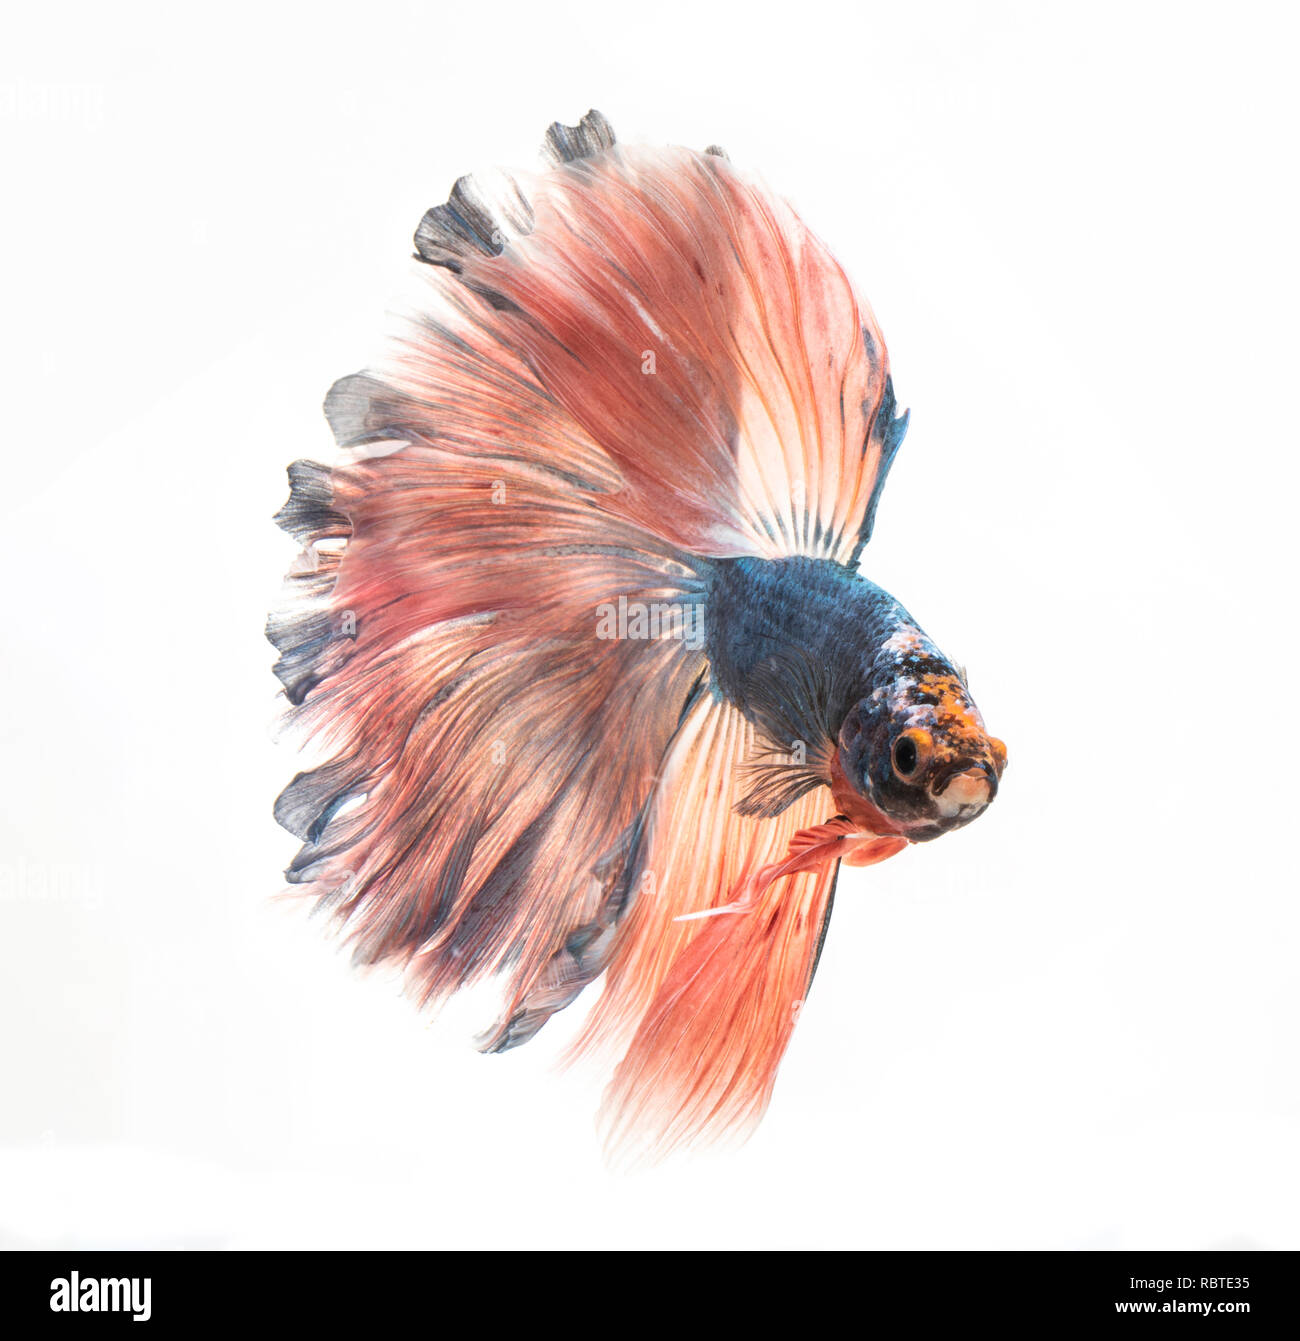 Siamese Fighting Fish also known as Betta is seen in an aquarium in Chicago, US. Bettas are the most common species in the world-wide aquarium trade. Stock Photo